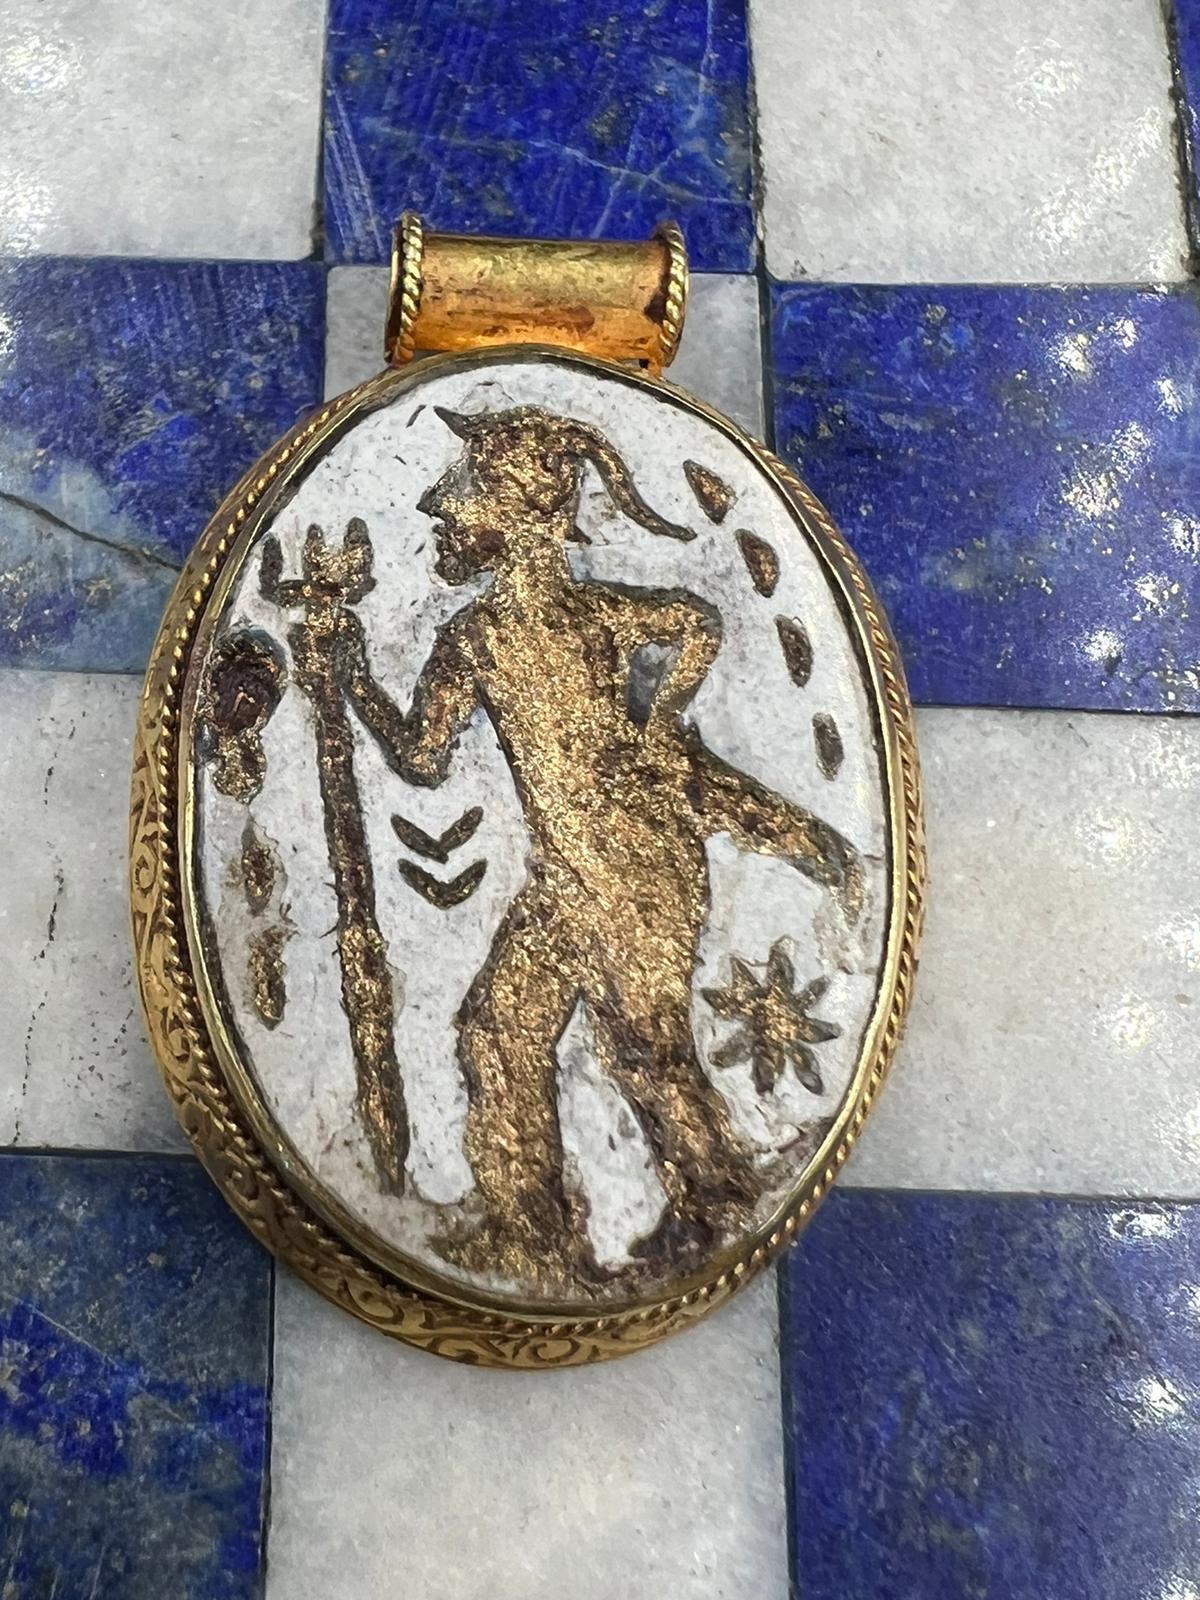 Cabochon Bochic Curated “Alexander Mocdon” Antique Cameo, Afghanistan 18k Gold & Agate  For Sale